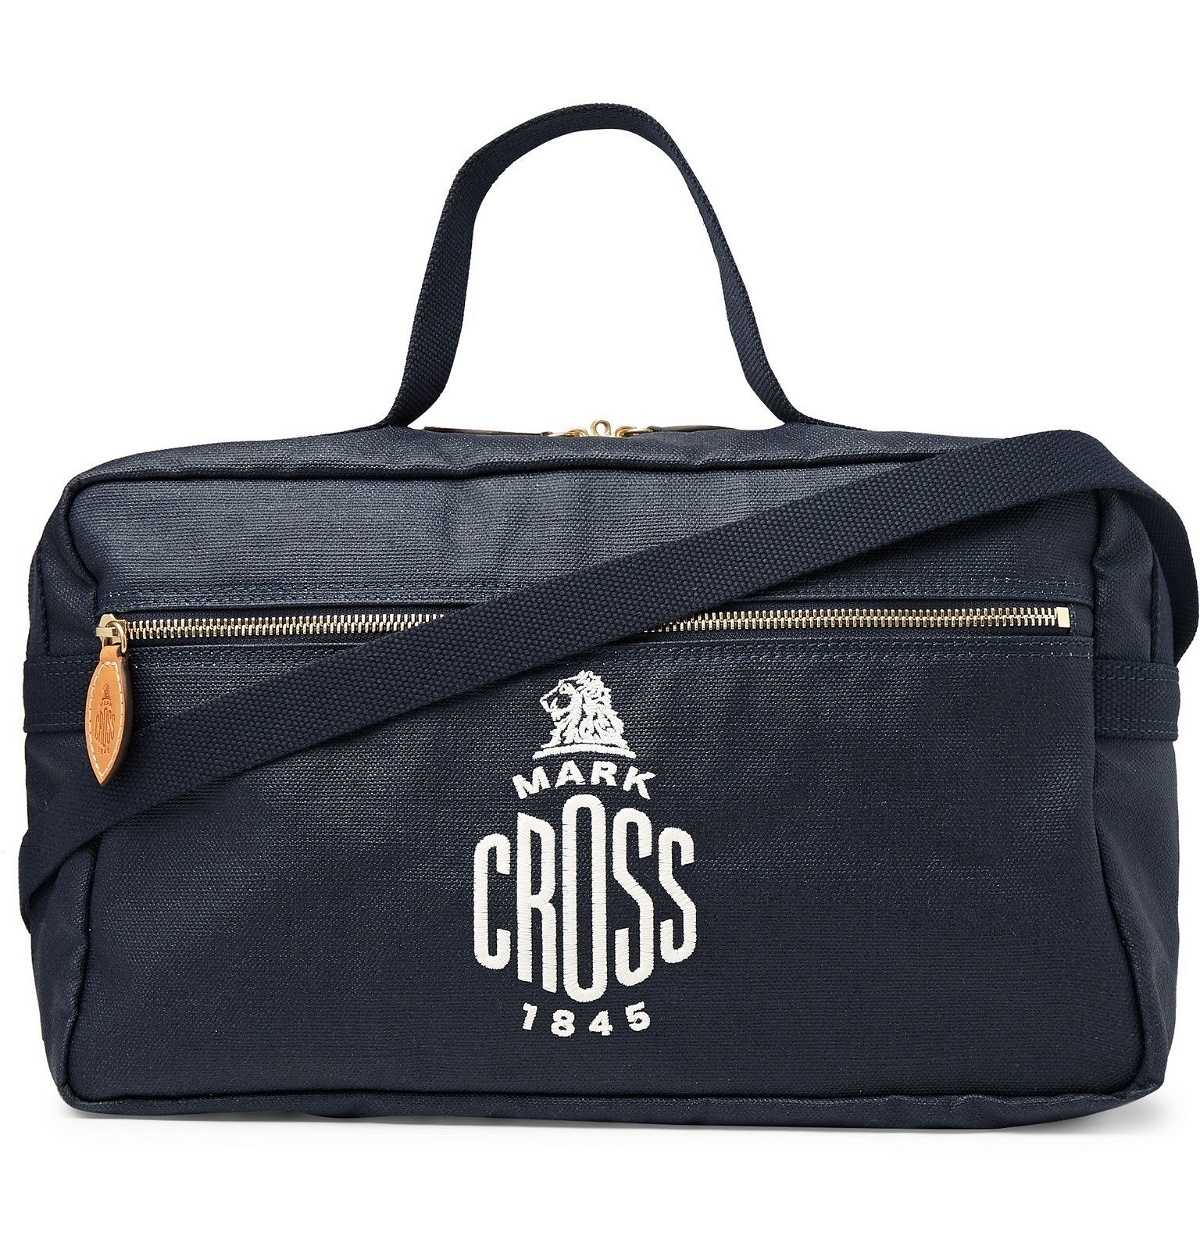 How to Tell if a Mark Cross Bag Is Real